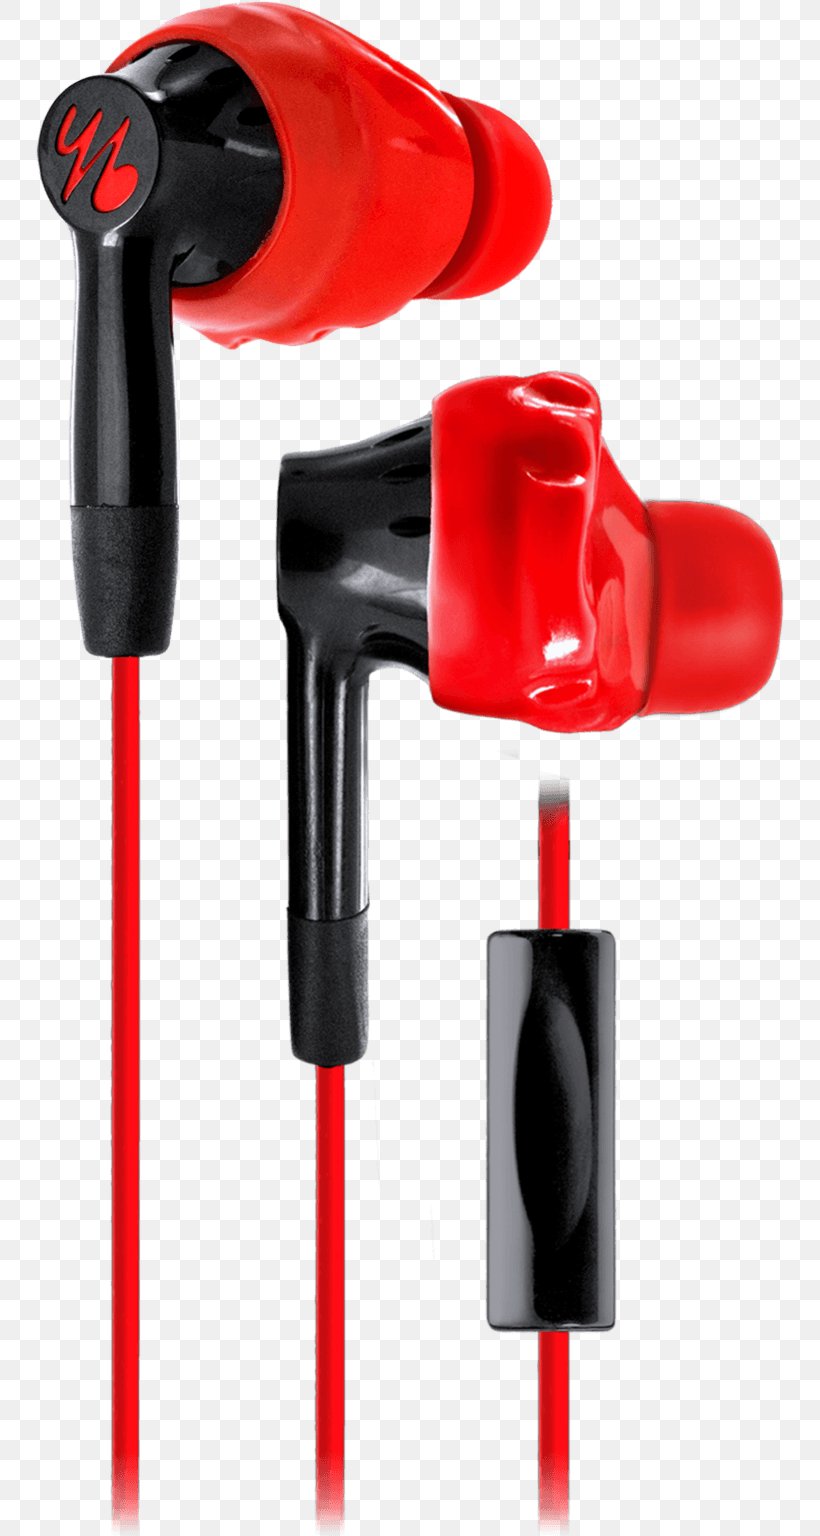 Microphone Yurbuds Inspire 400 JBL Yurbuds Inspire 200 JBL Yurbuds Inspire 300 Headphones, PNG, 748x1536px, Microphone, Audio, Audio Equipment, Ear, Electronic Device Download Free